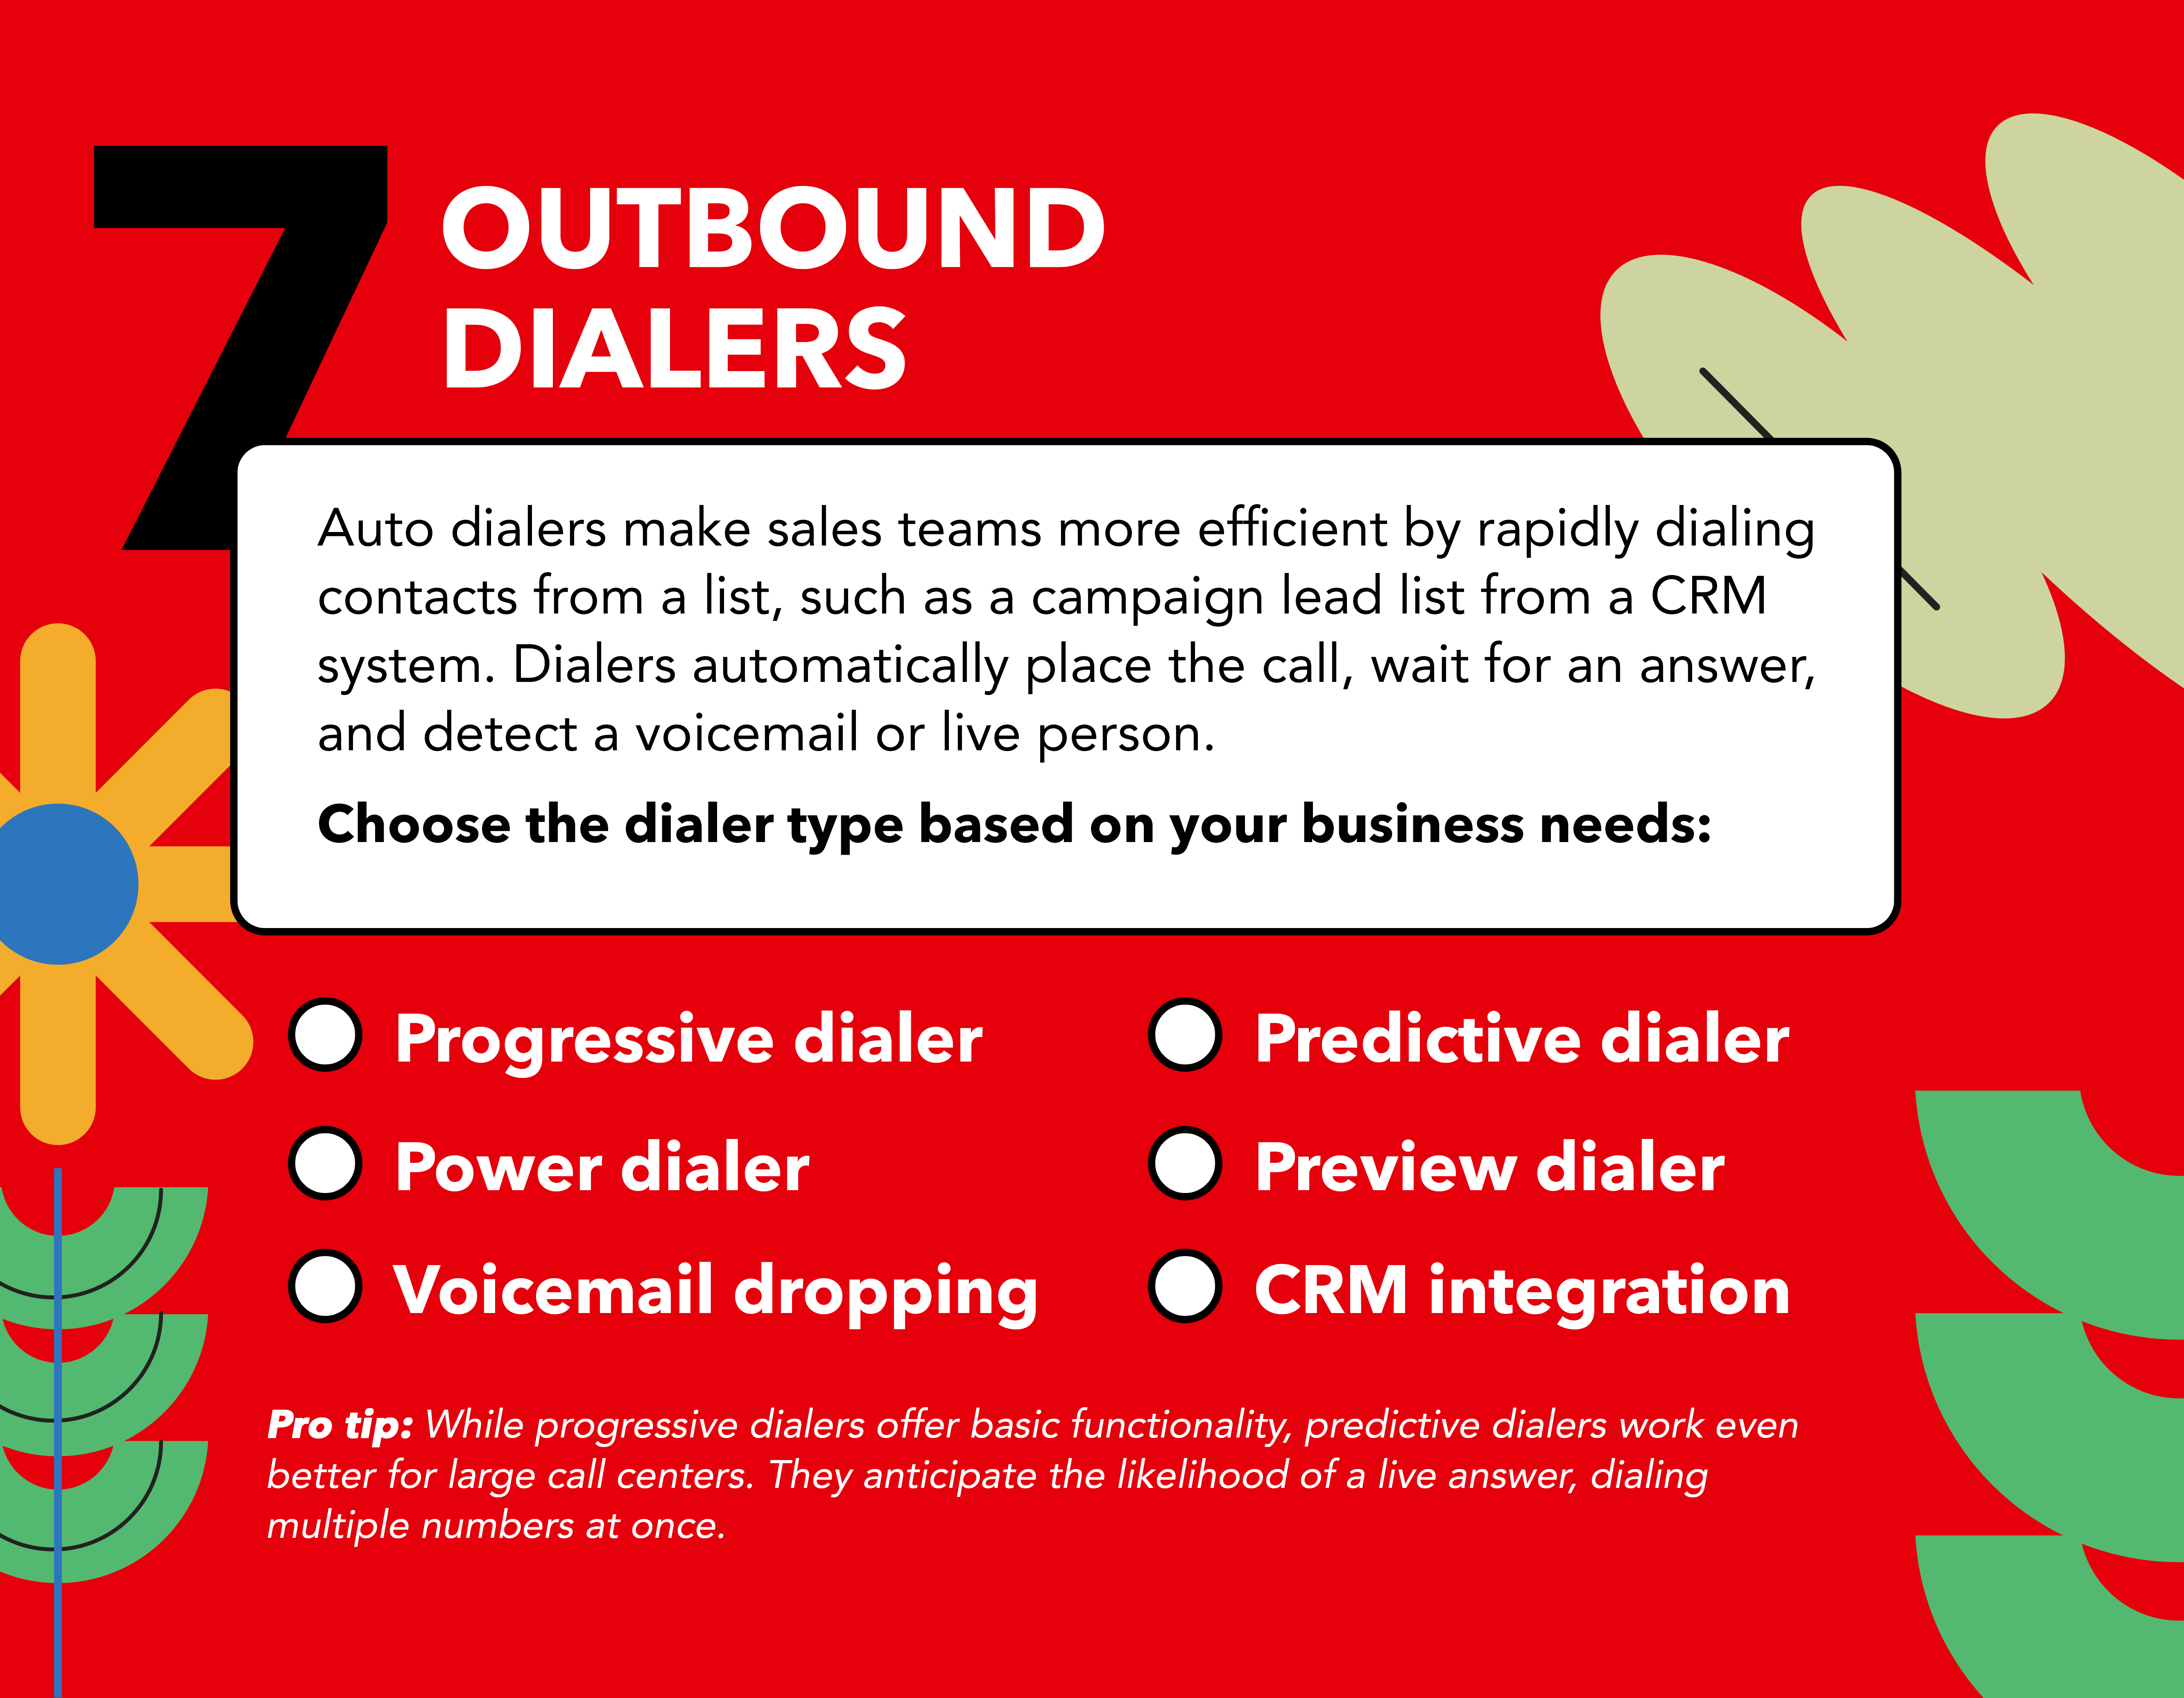 Contact center software requirements checklist - outbound dialers